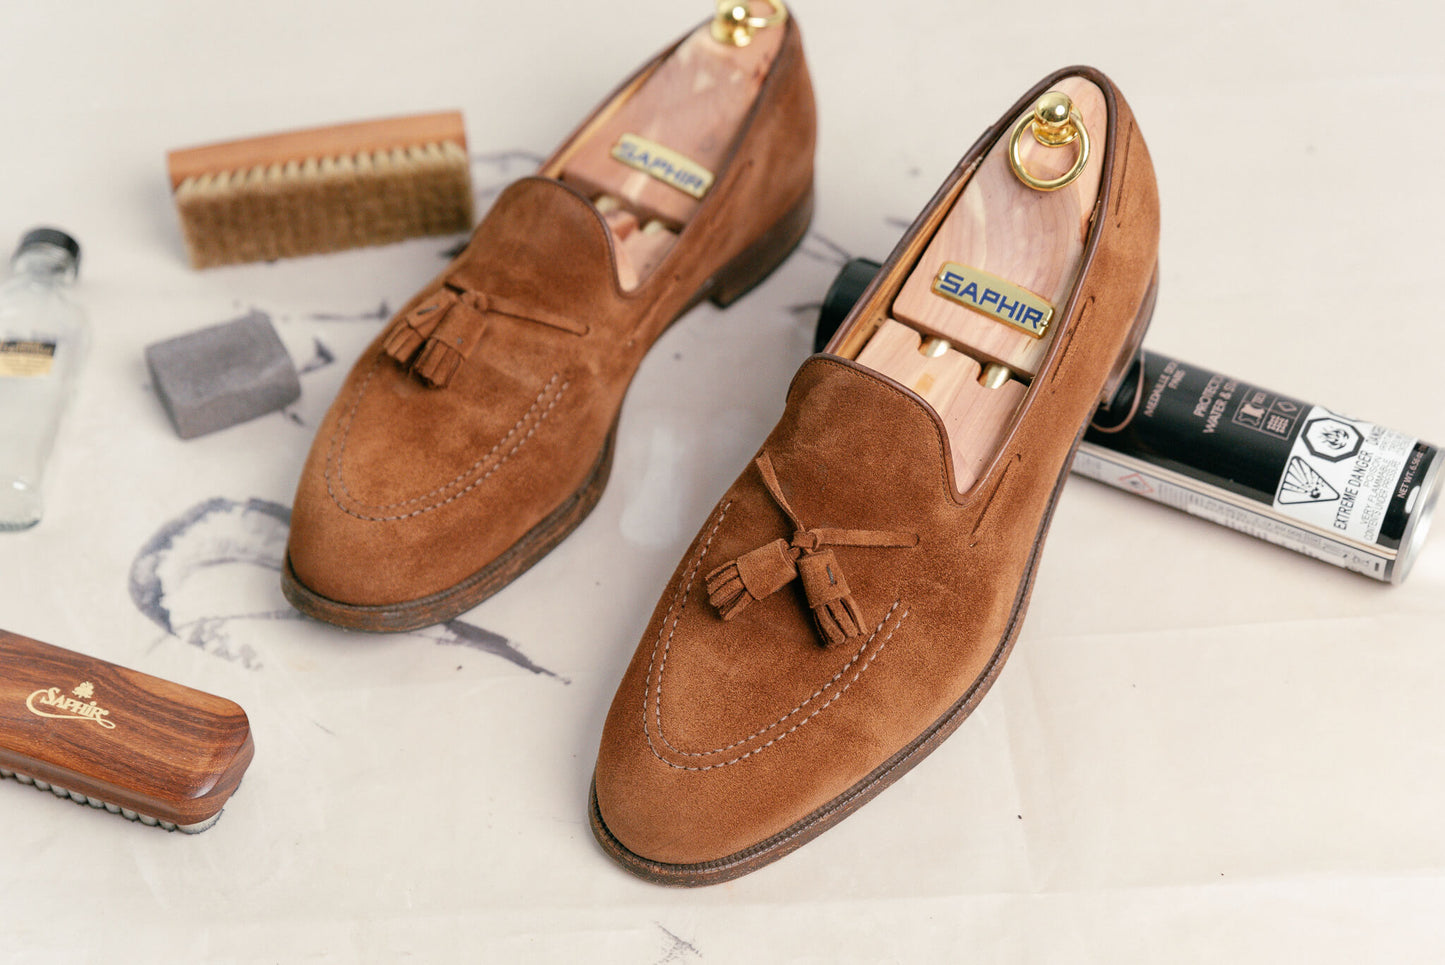 Saphir Cedar Shoe Trees displayed inside a pair of crockett & jones cavendish loafer in snuff suede after cleaning - Brillare